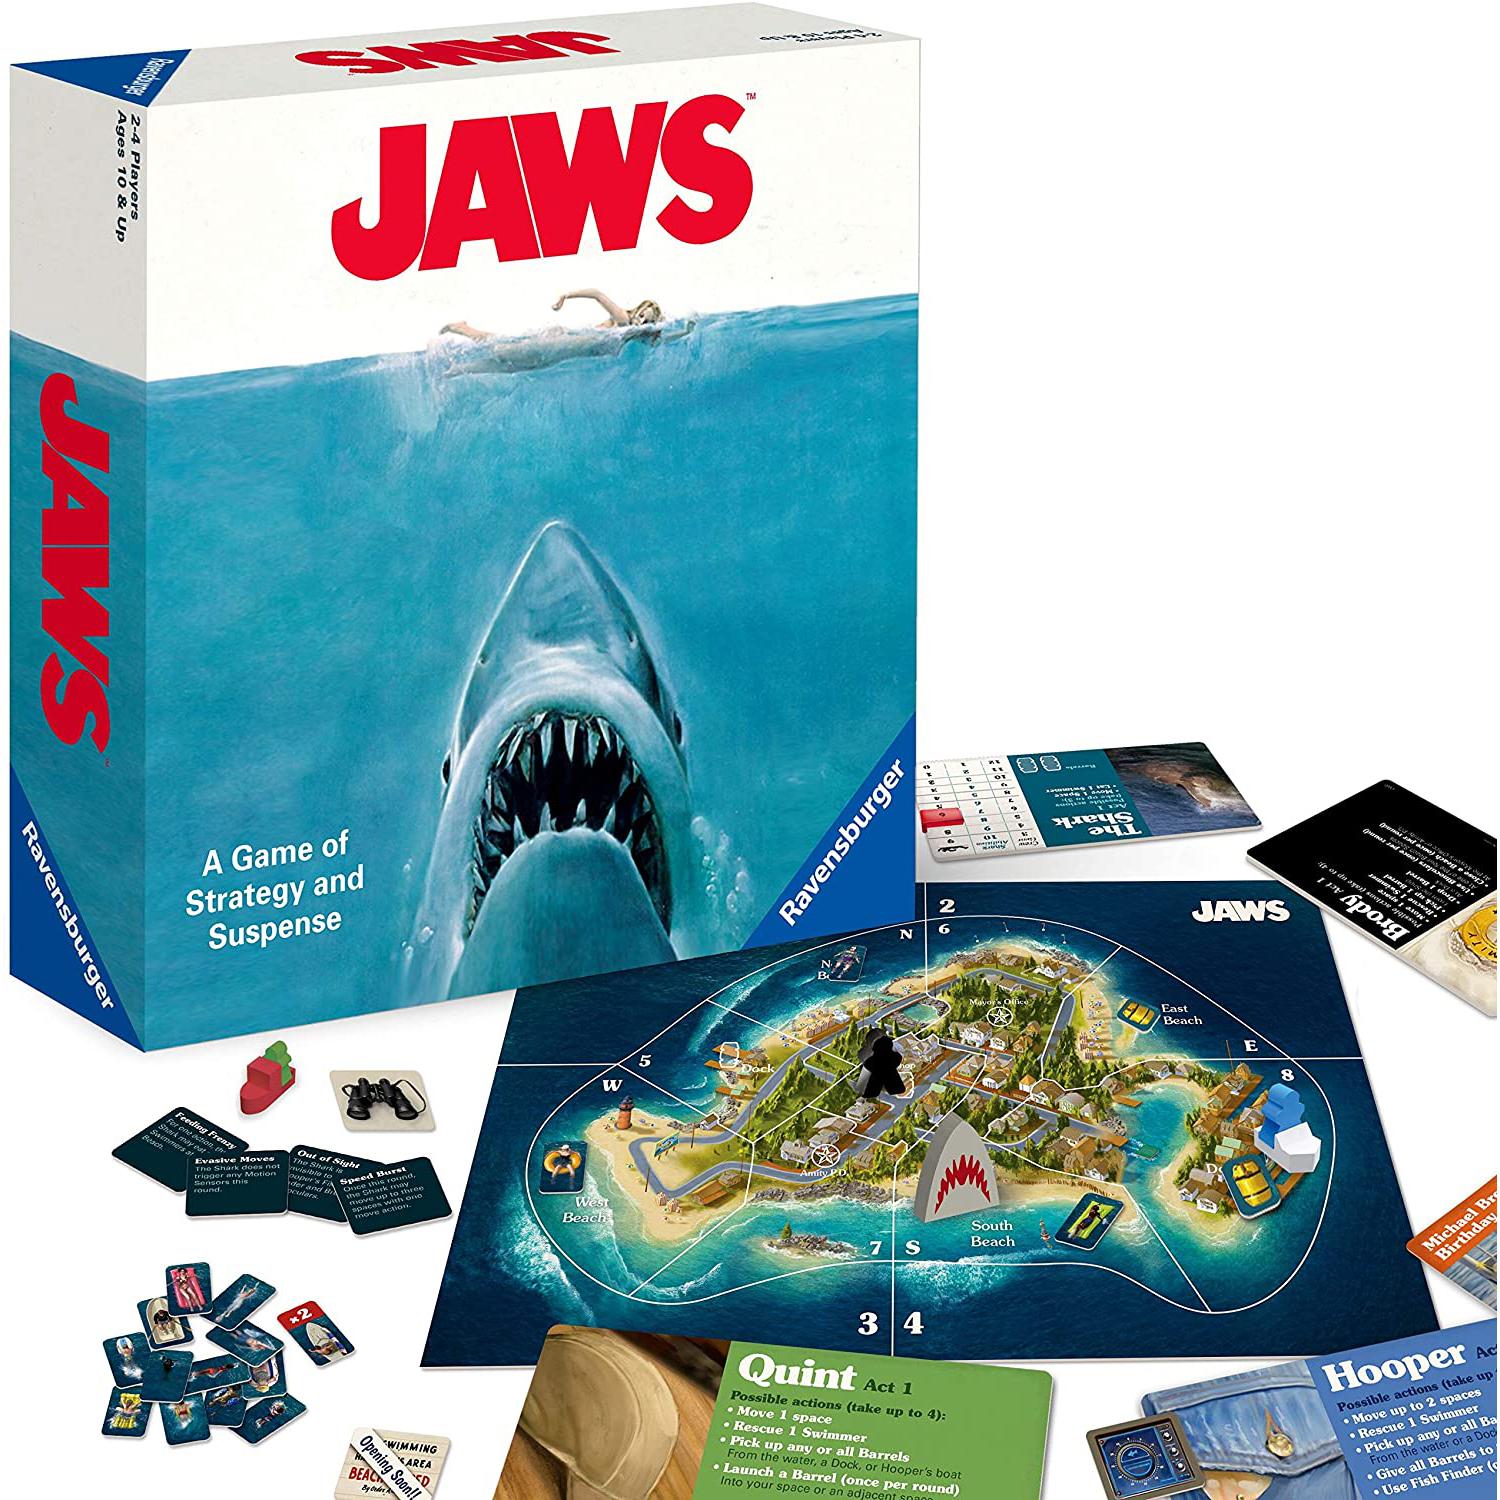 Ravensburger Jaws Board Game for $16.86